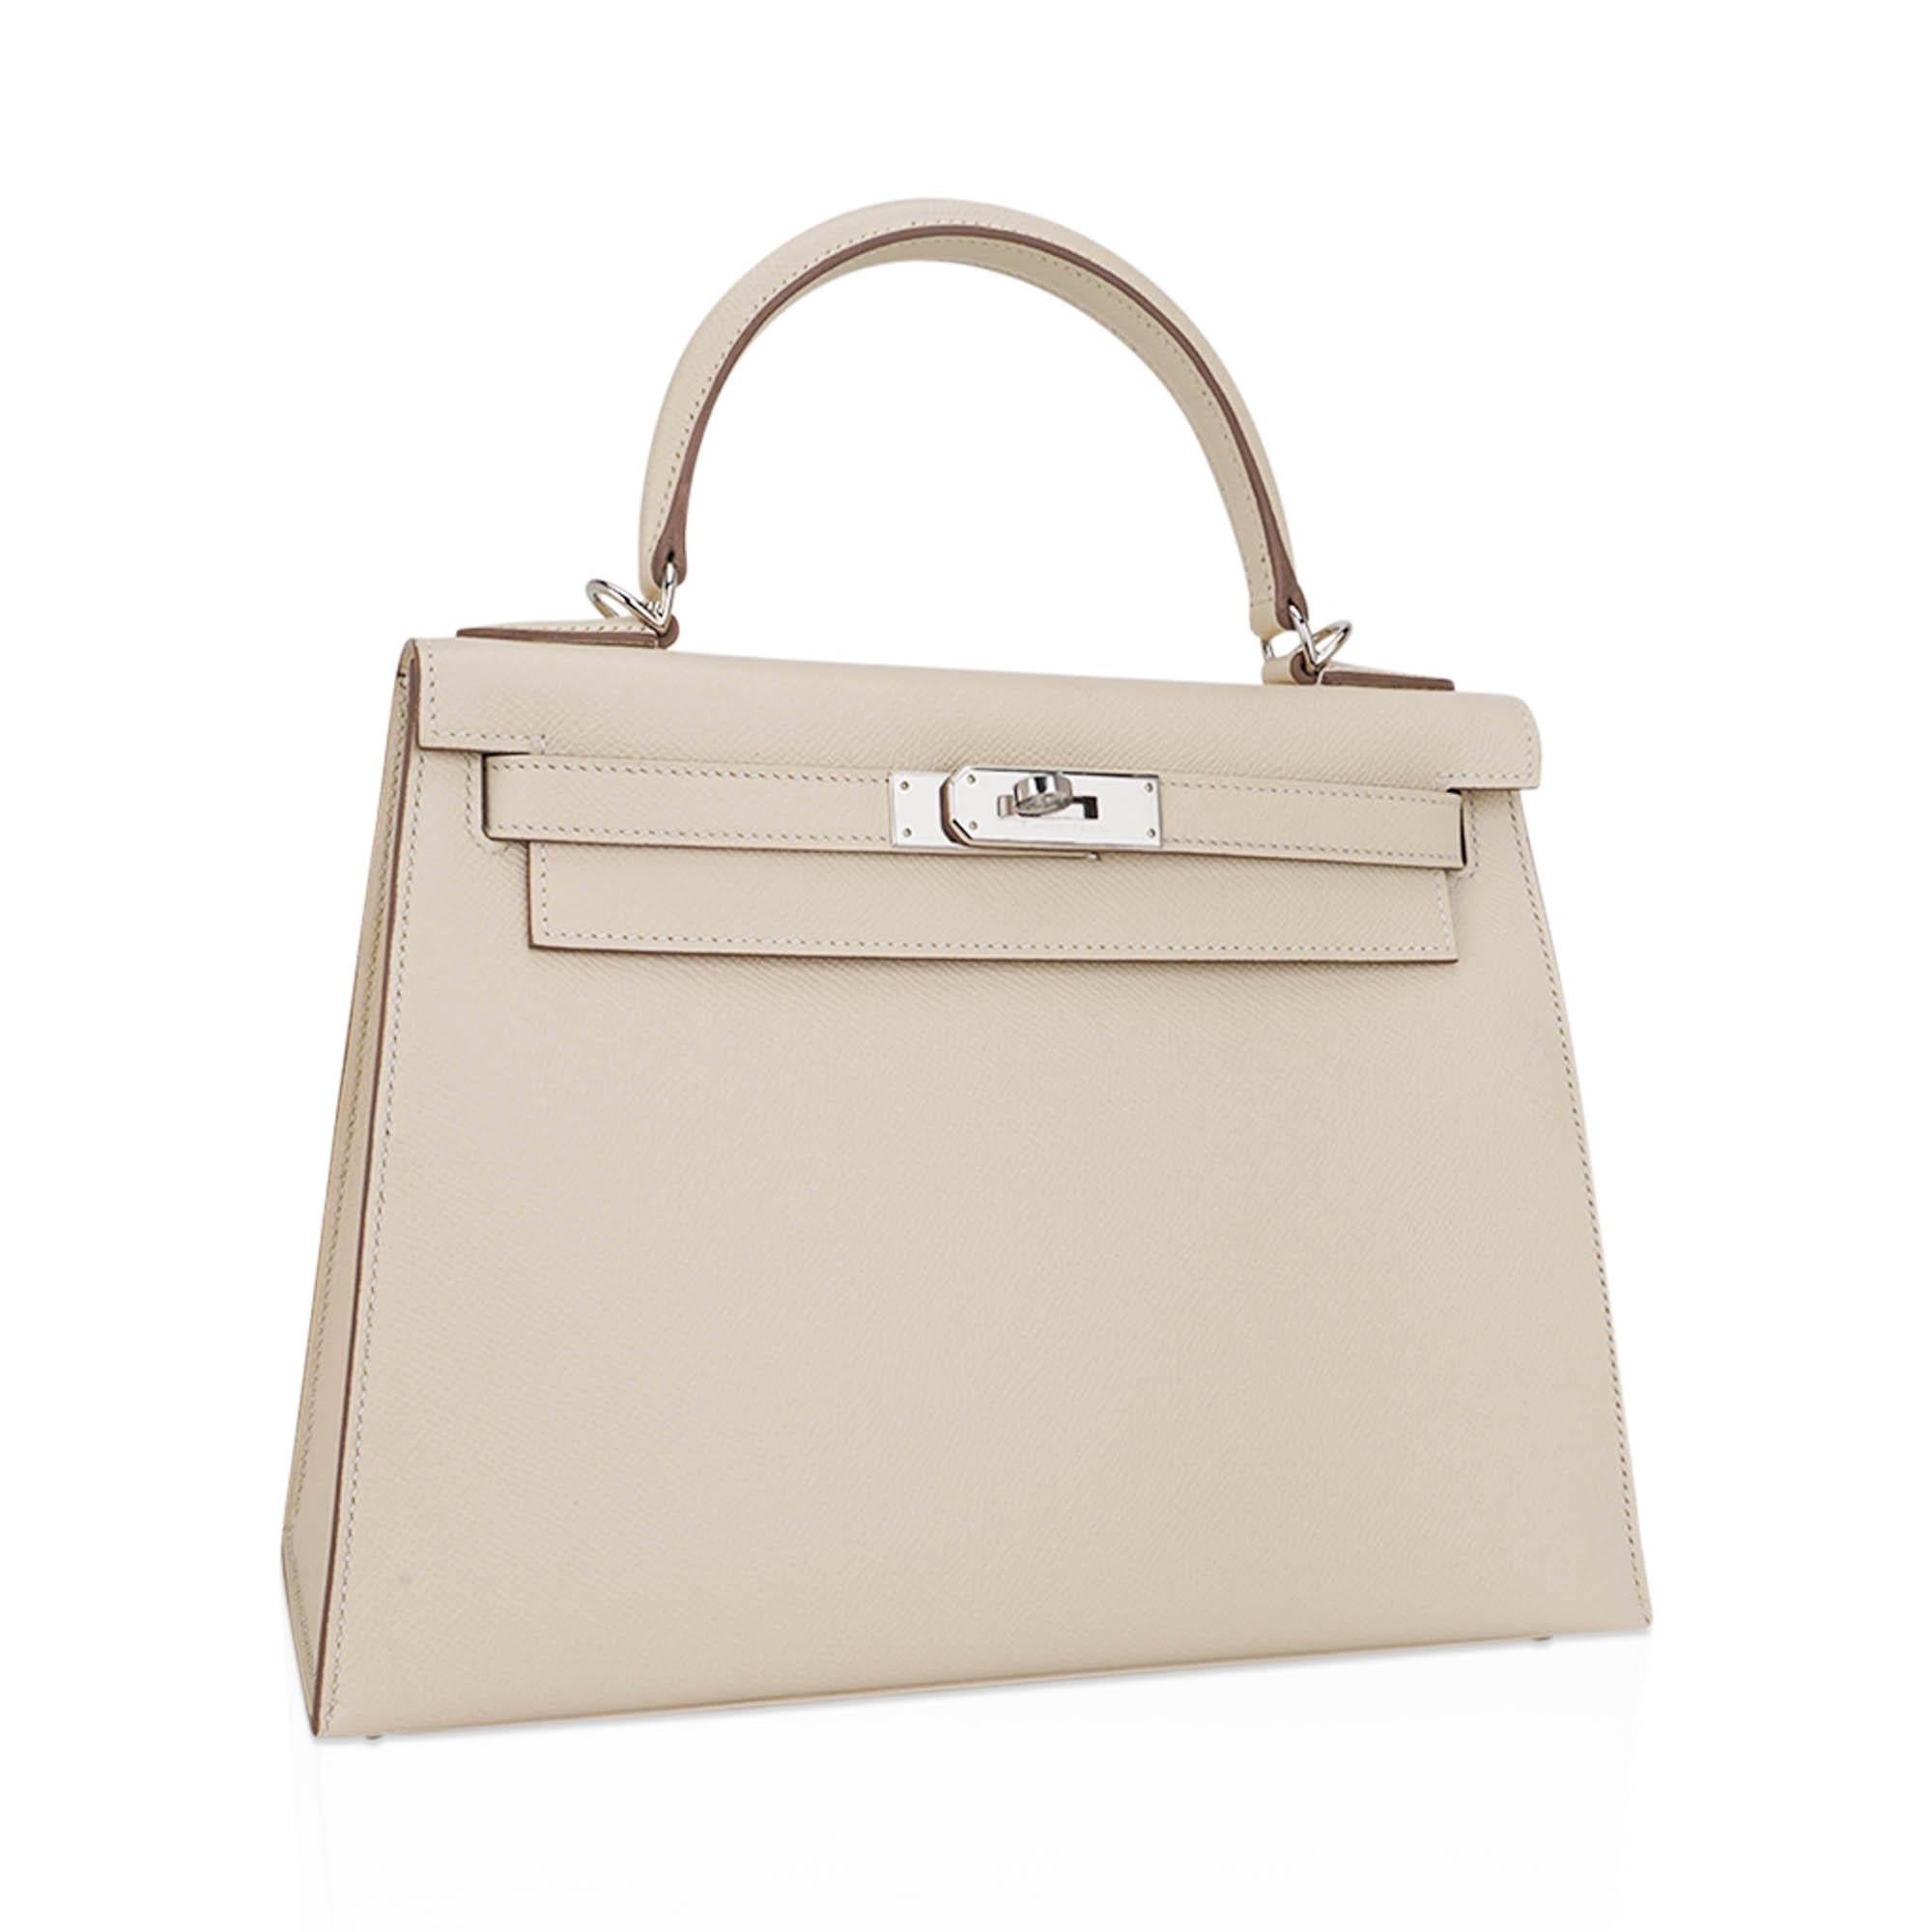 Mightychic offers an Hermes Kelly Sellier 28 feature in coveted Craie.
This epsom leather Hermes Kelly Sellier is the ultimate neutral and perfect for year round wear.
Fresh with Palladium Hardware.
Divine size for day to evening.
Comes with